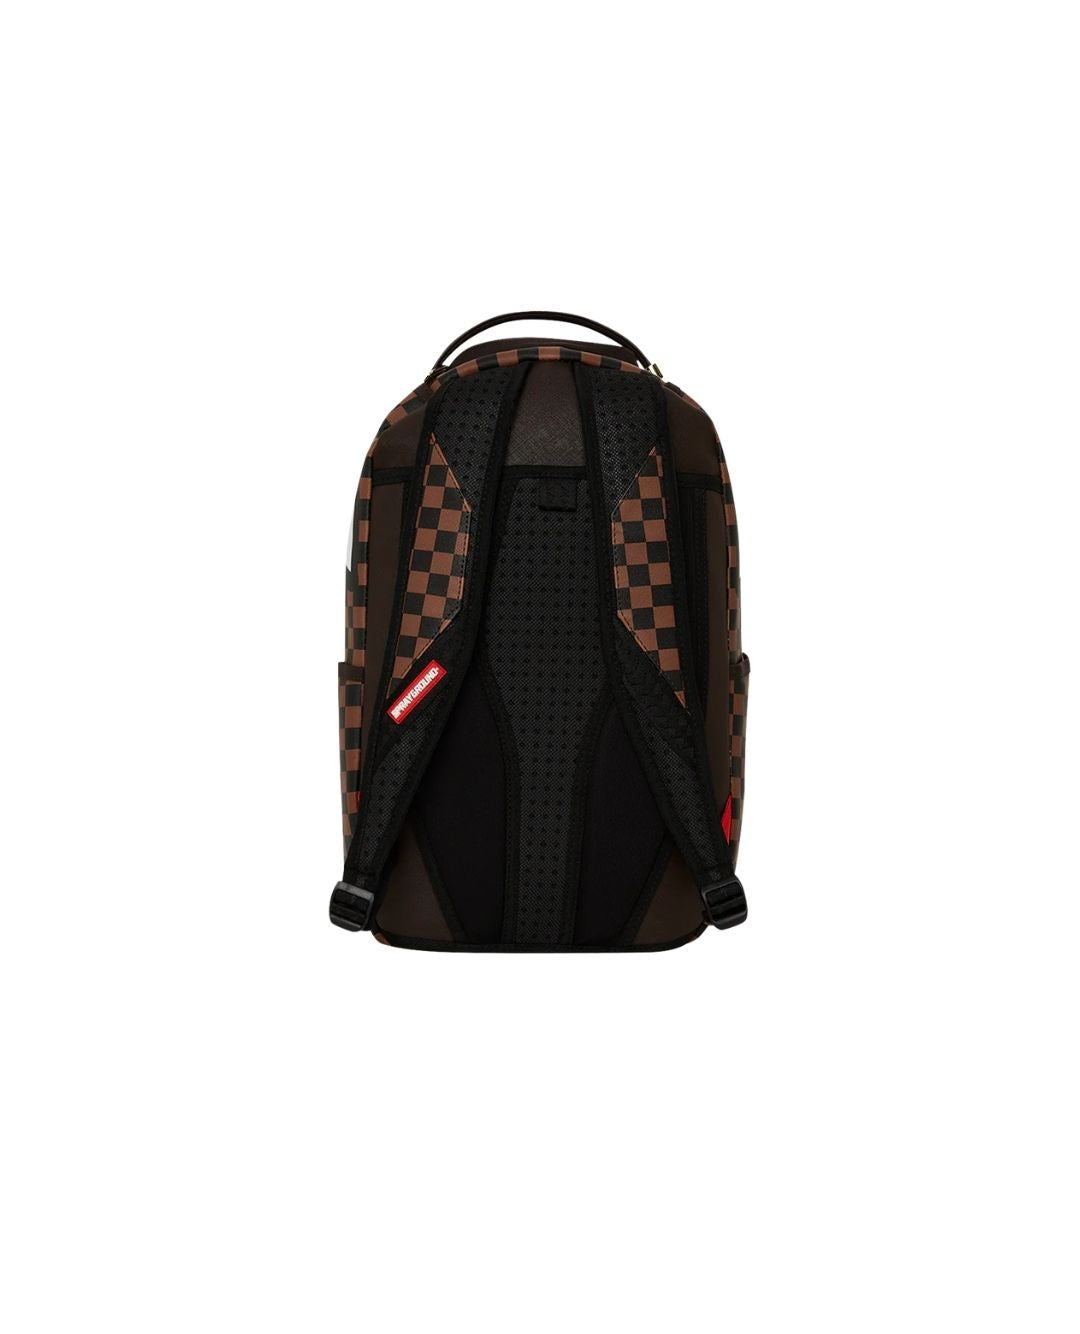 SIP CAMO ACCENT DLXSV BACKPACK